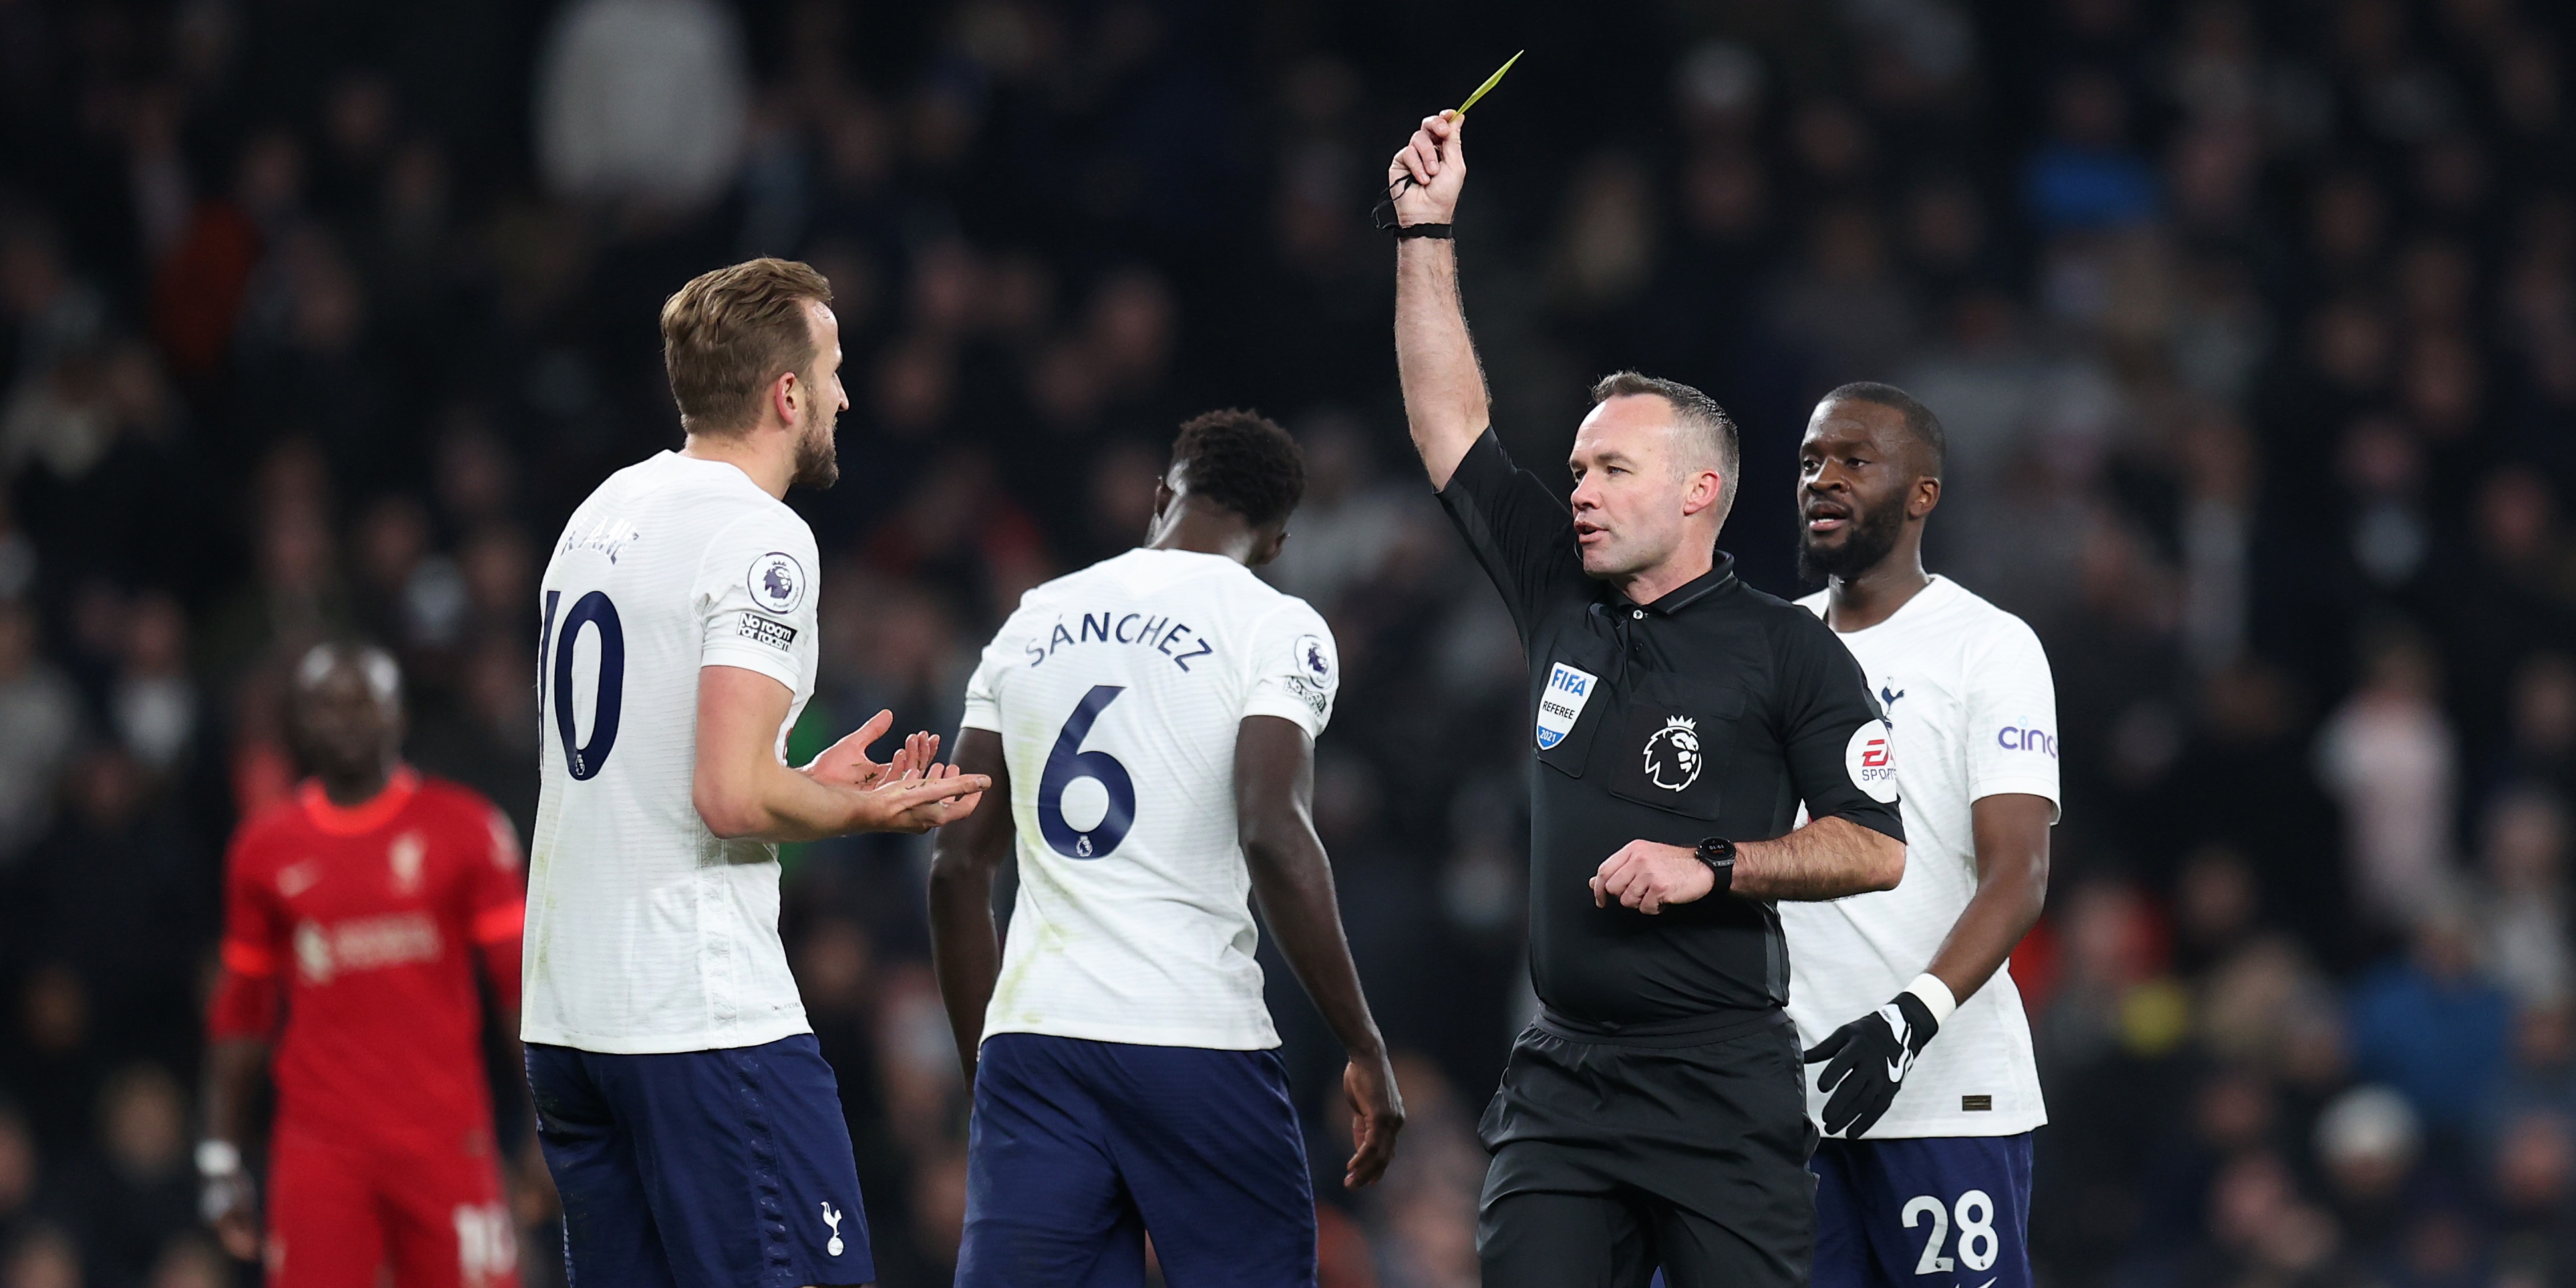 ‘Bad decisions every week’ – Ex-Spurs star questions Kane call & warns PGMOL could become an international laughing stock